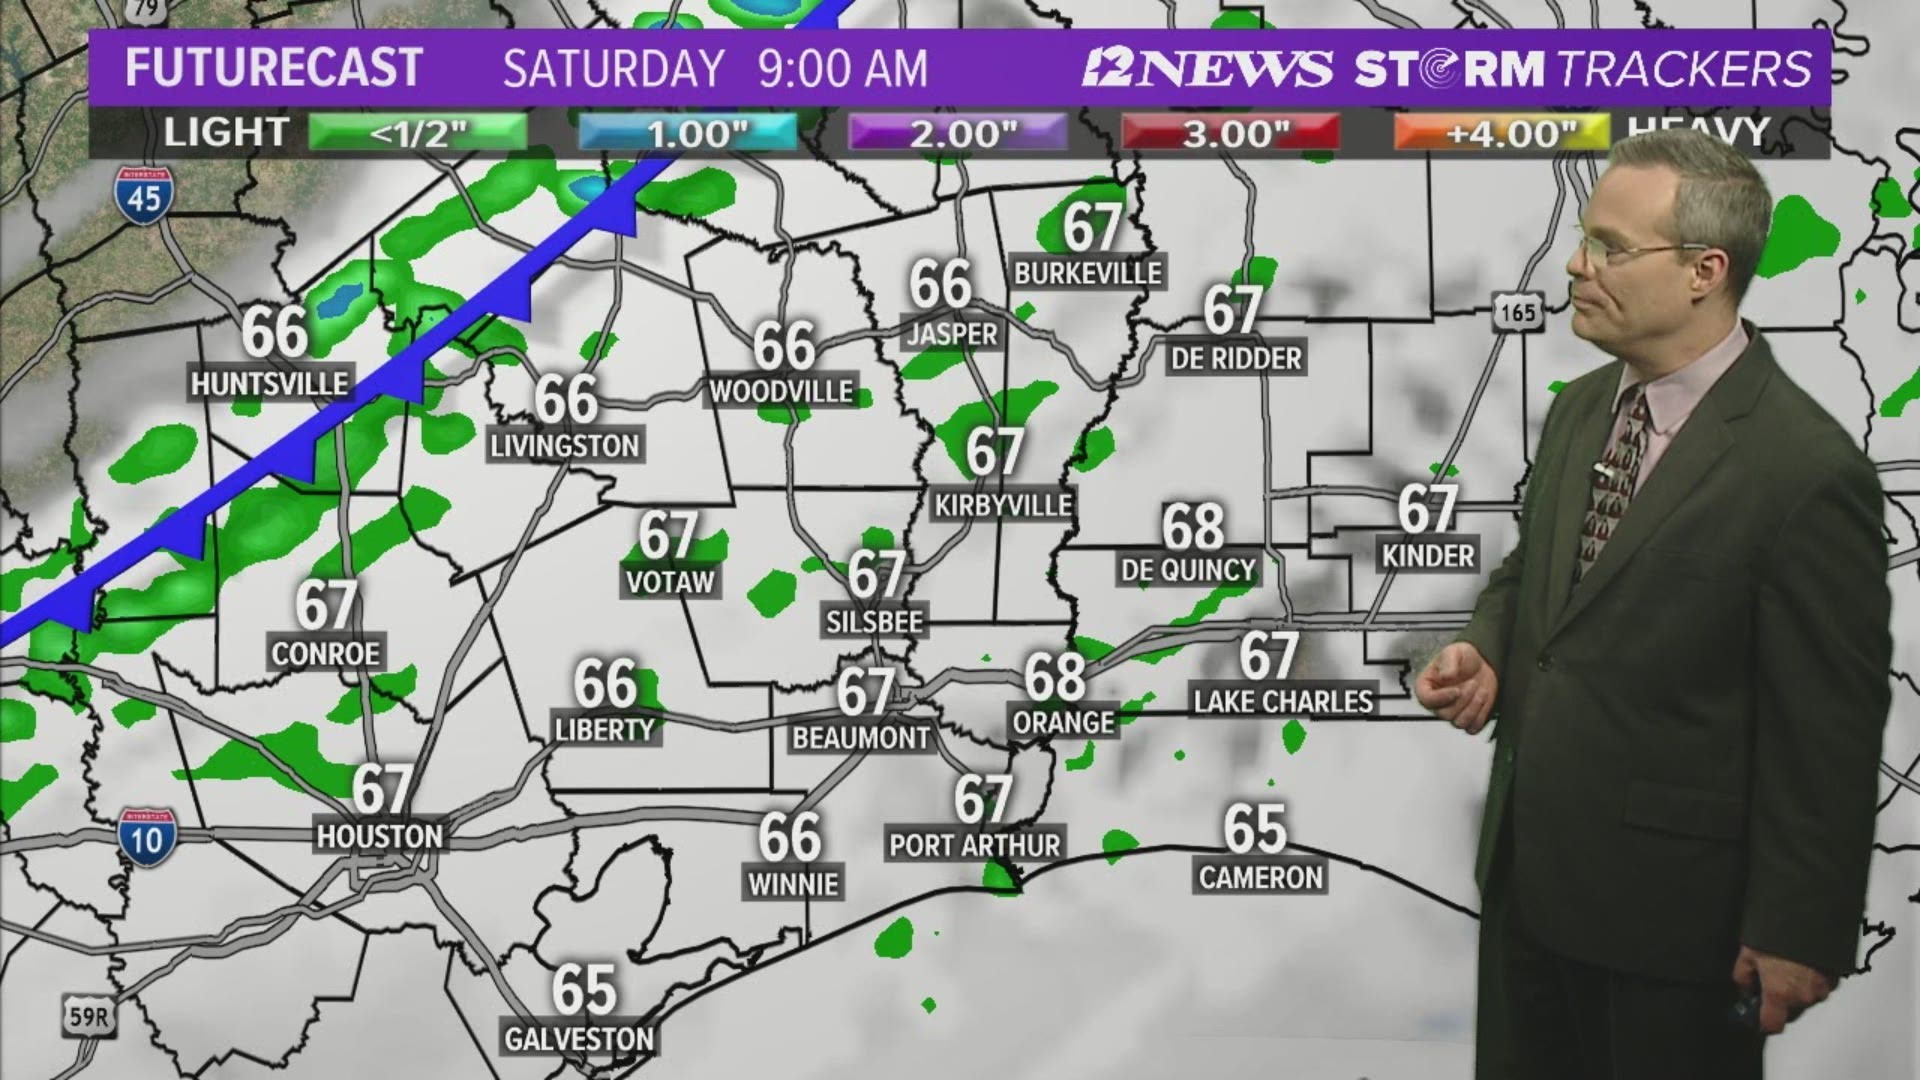 The cold front Saturday Afternoon will make it feel like January in SE Texas with lows in the 30s and highs in the 50s.  Heavy rainfall possible Thursday.